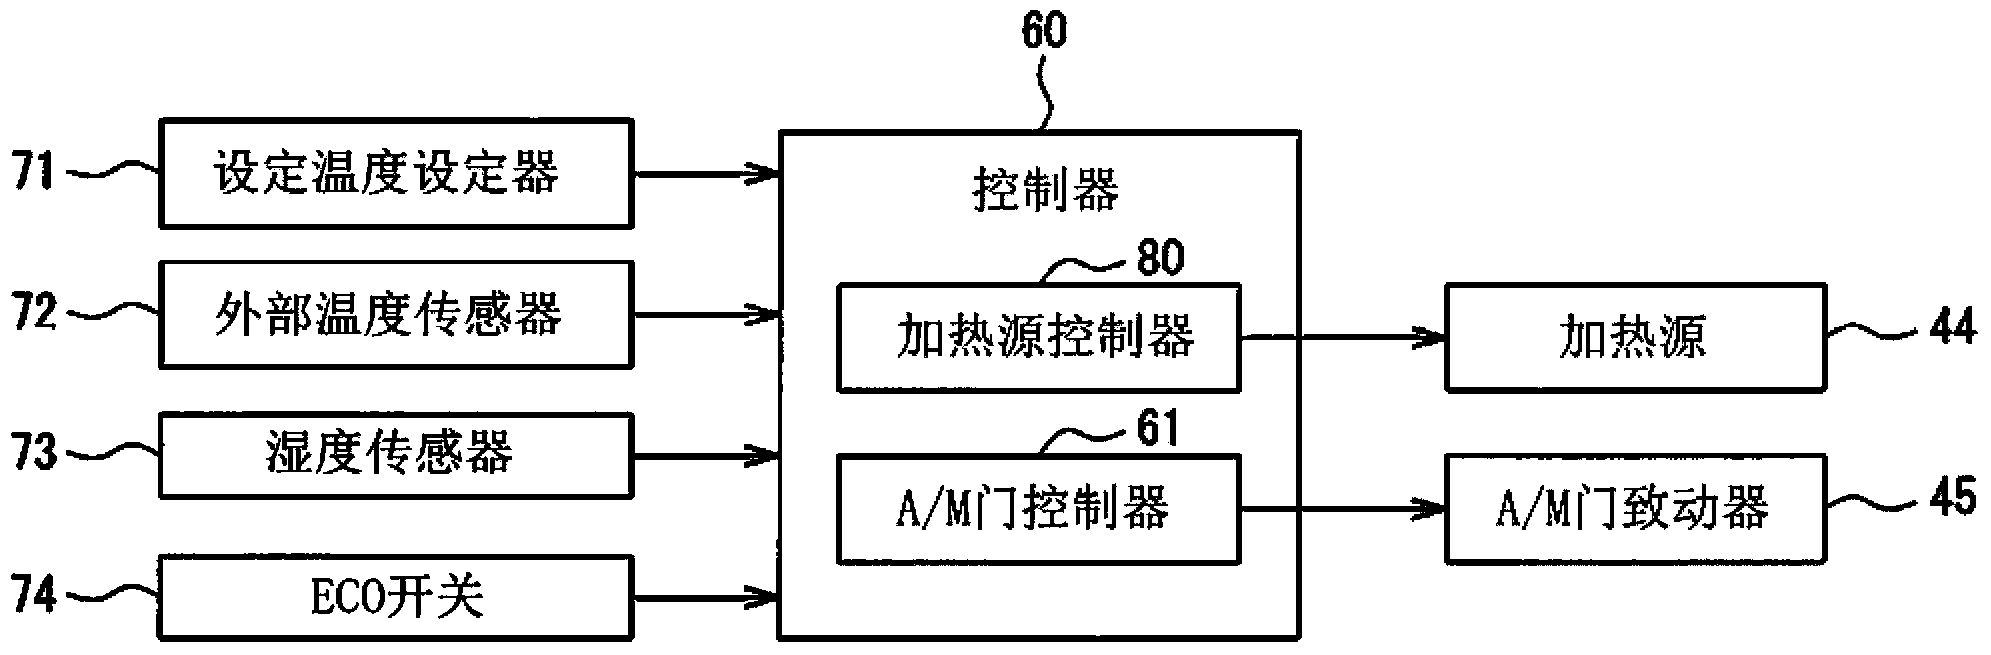 Air conditioning system for vehicles